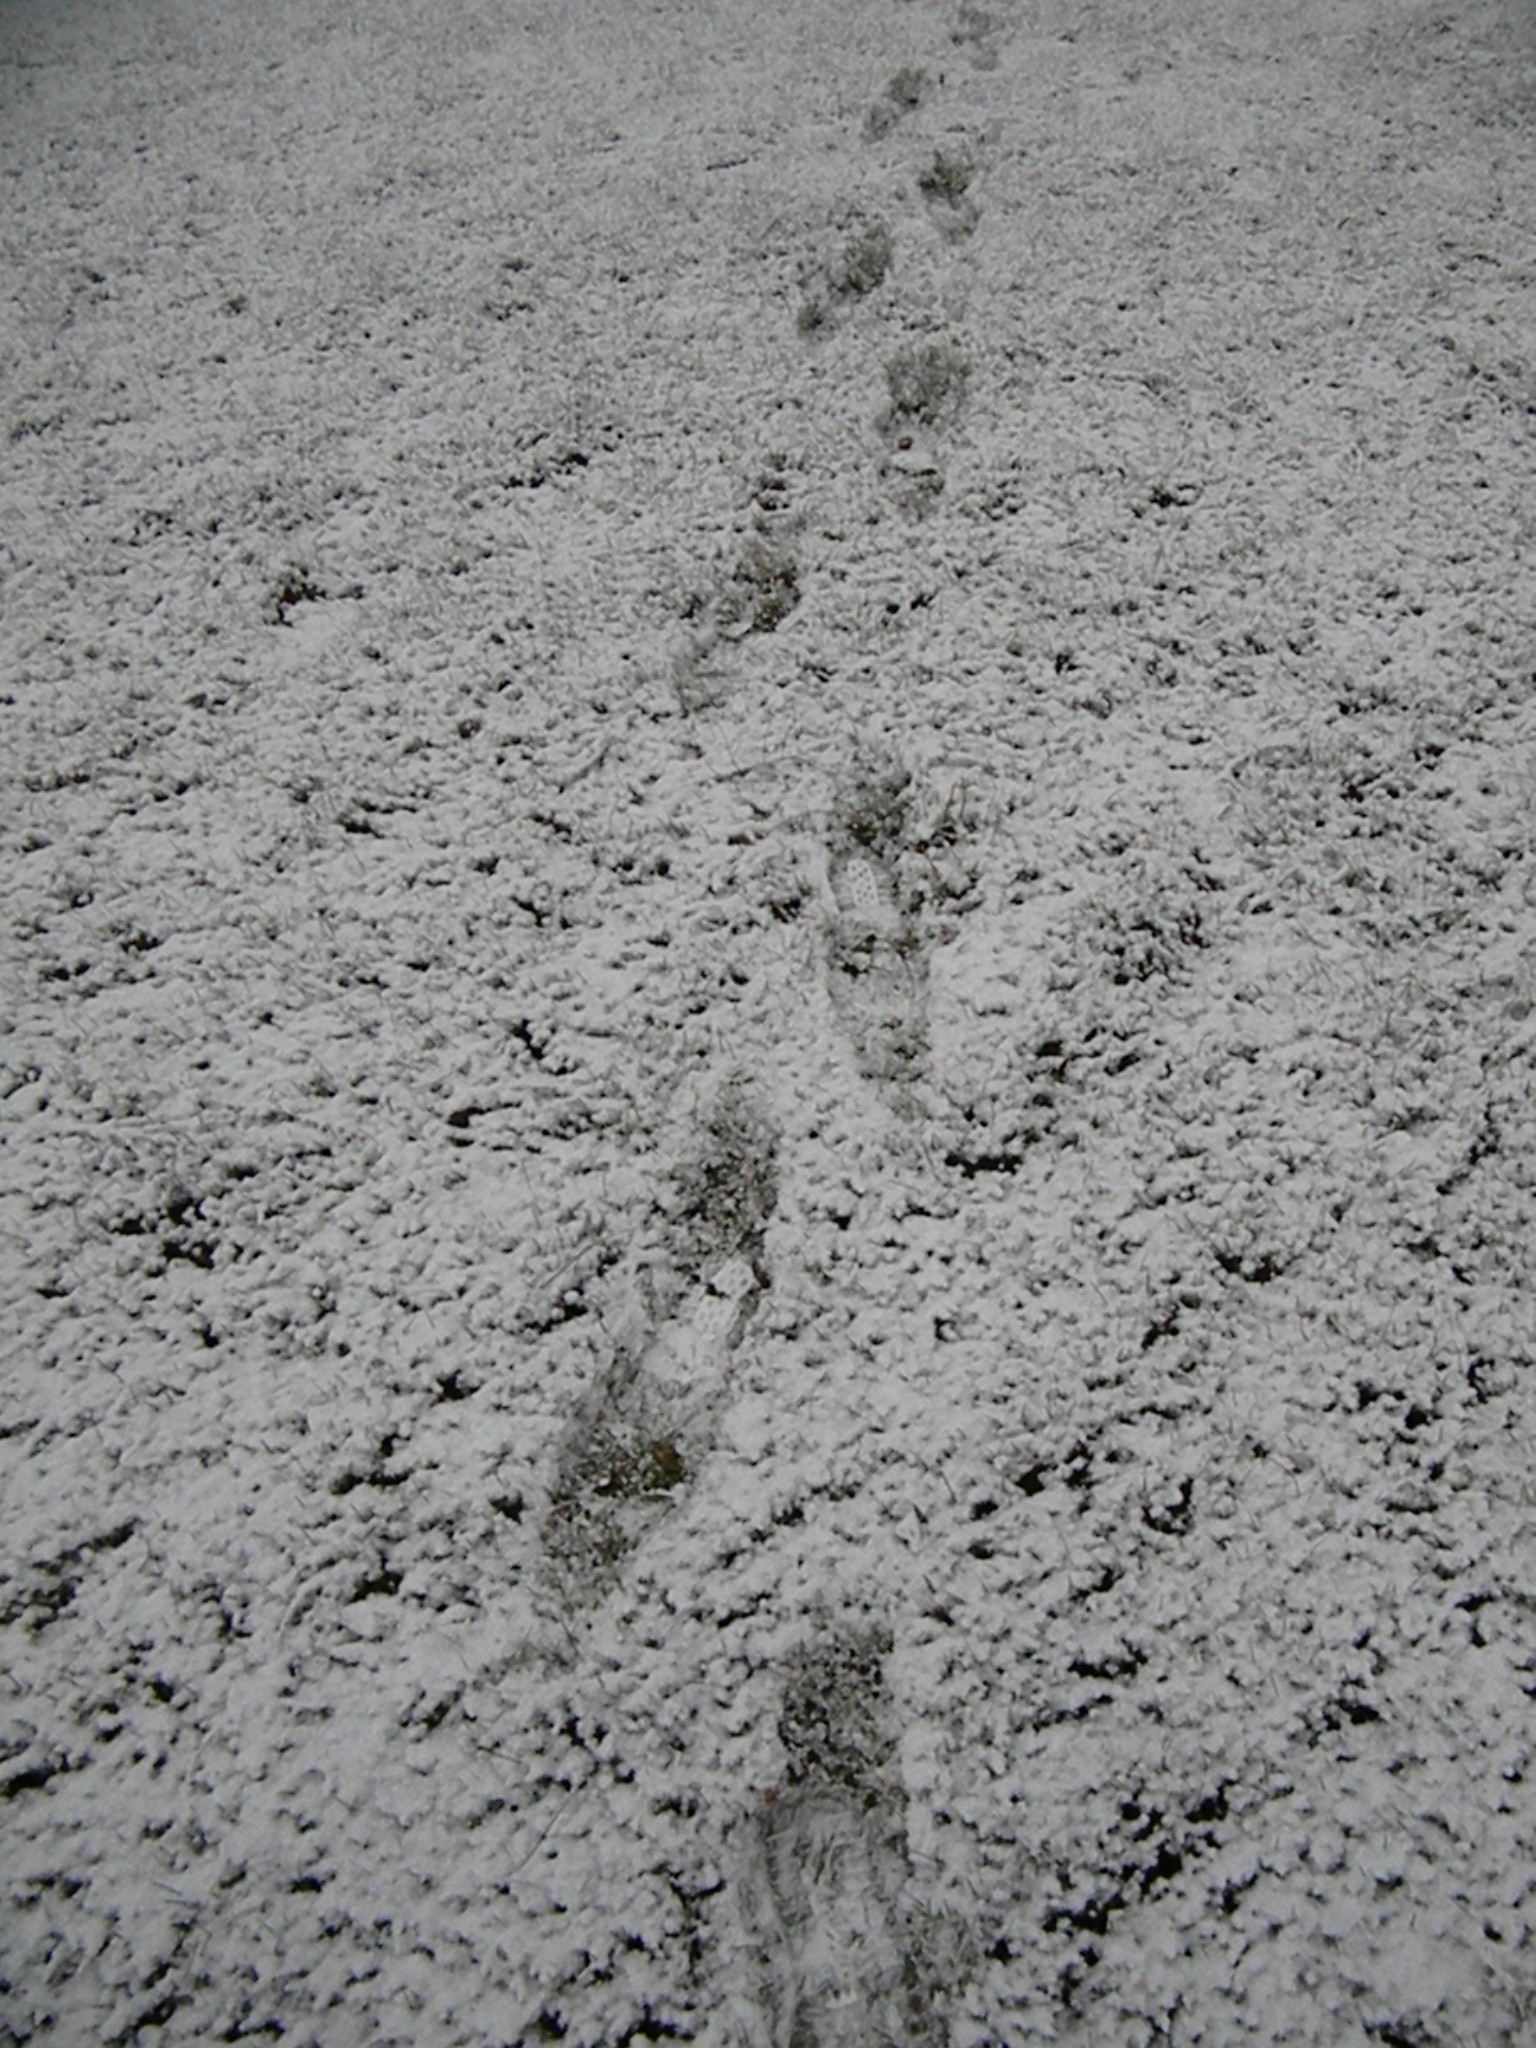 Footprints in the snow photo